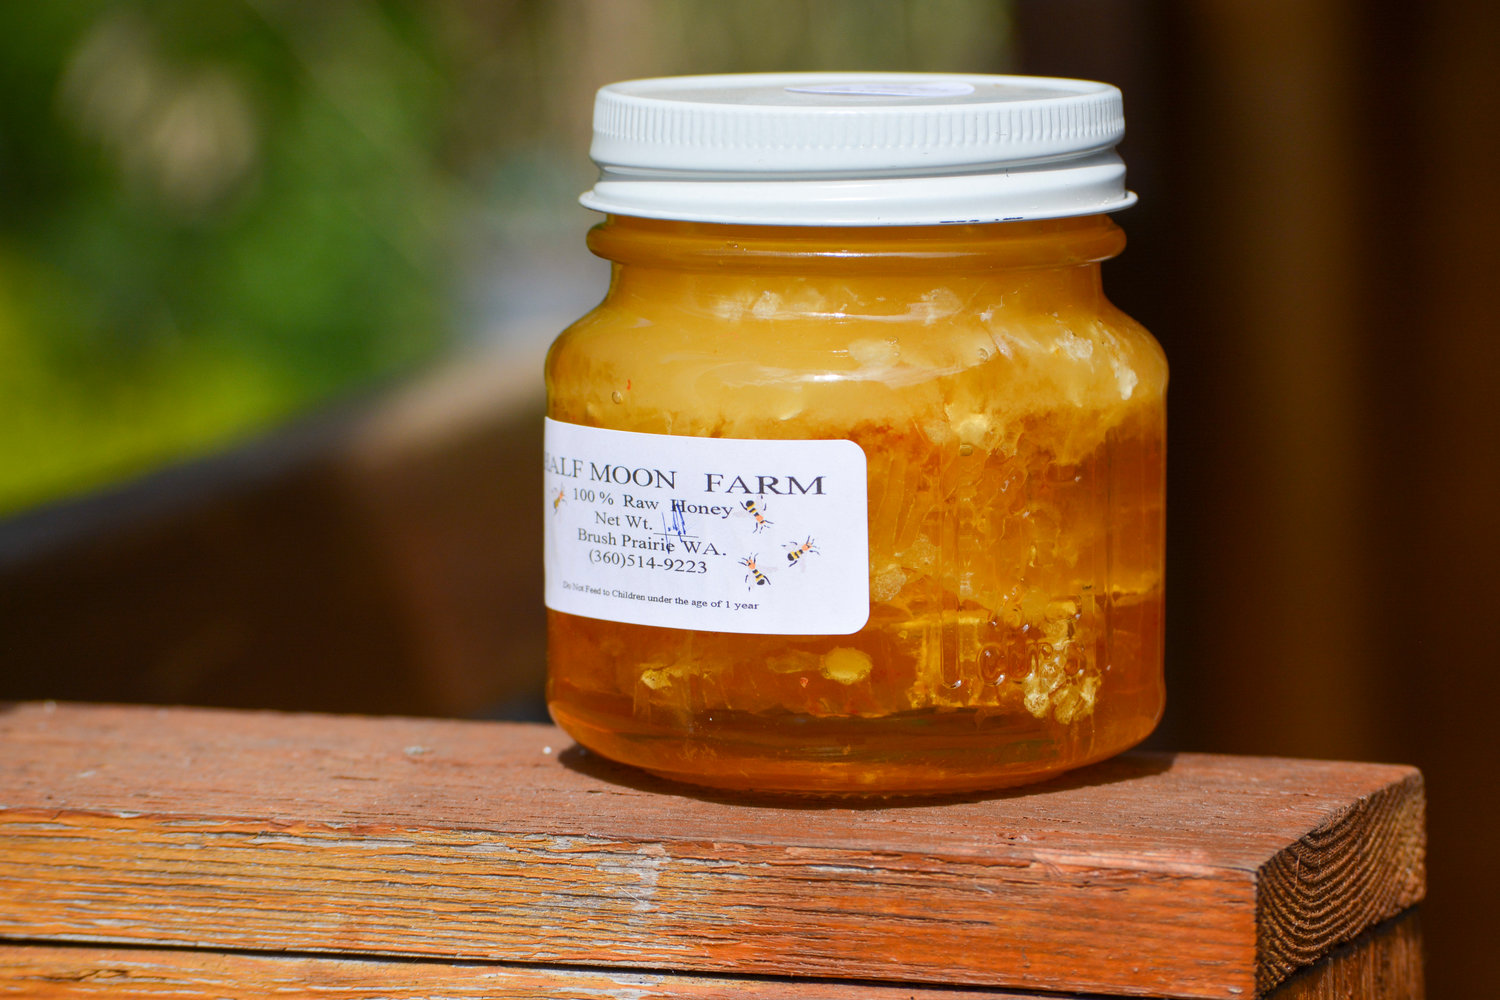 Half Moon Farm owner Brenda Calvert produces jars of honey like the one pictured. She started raising bees 16 years ago and now operates 20 hives.